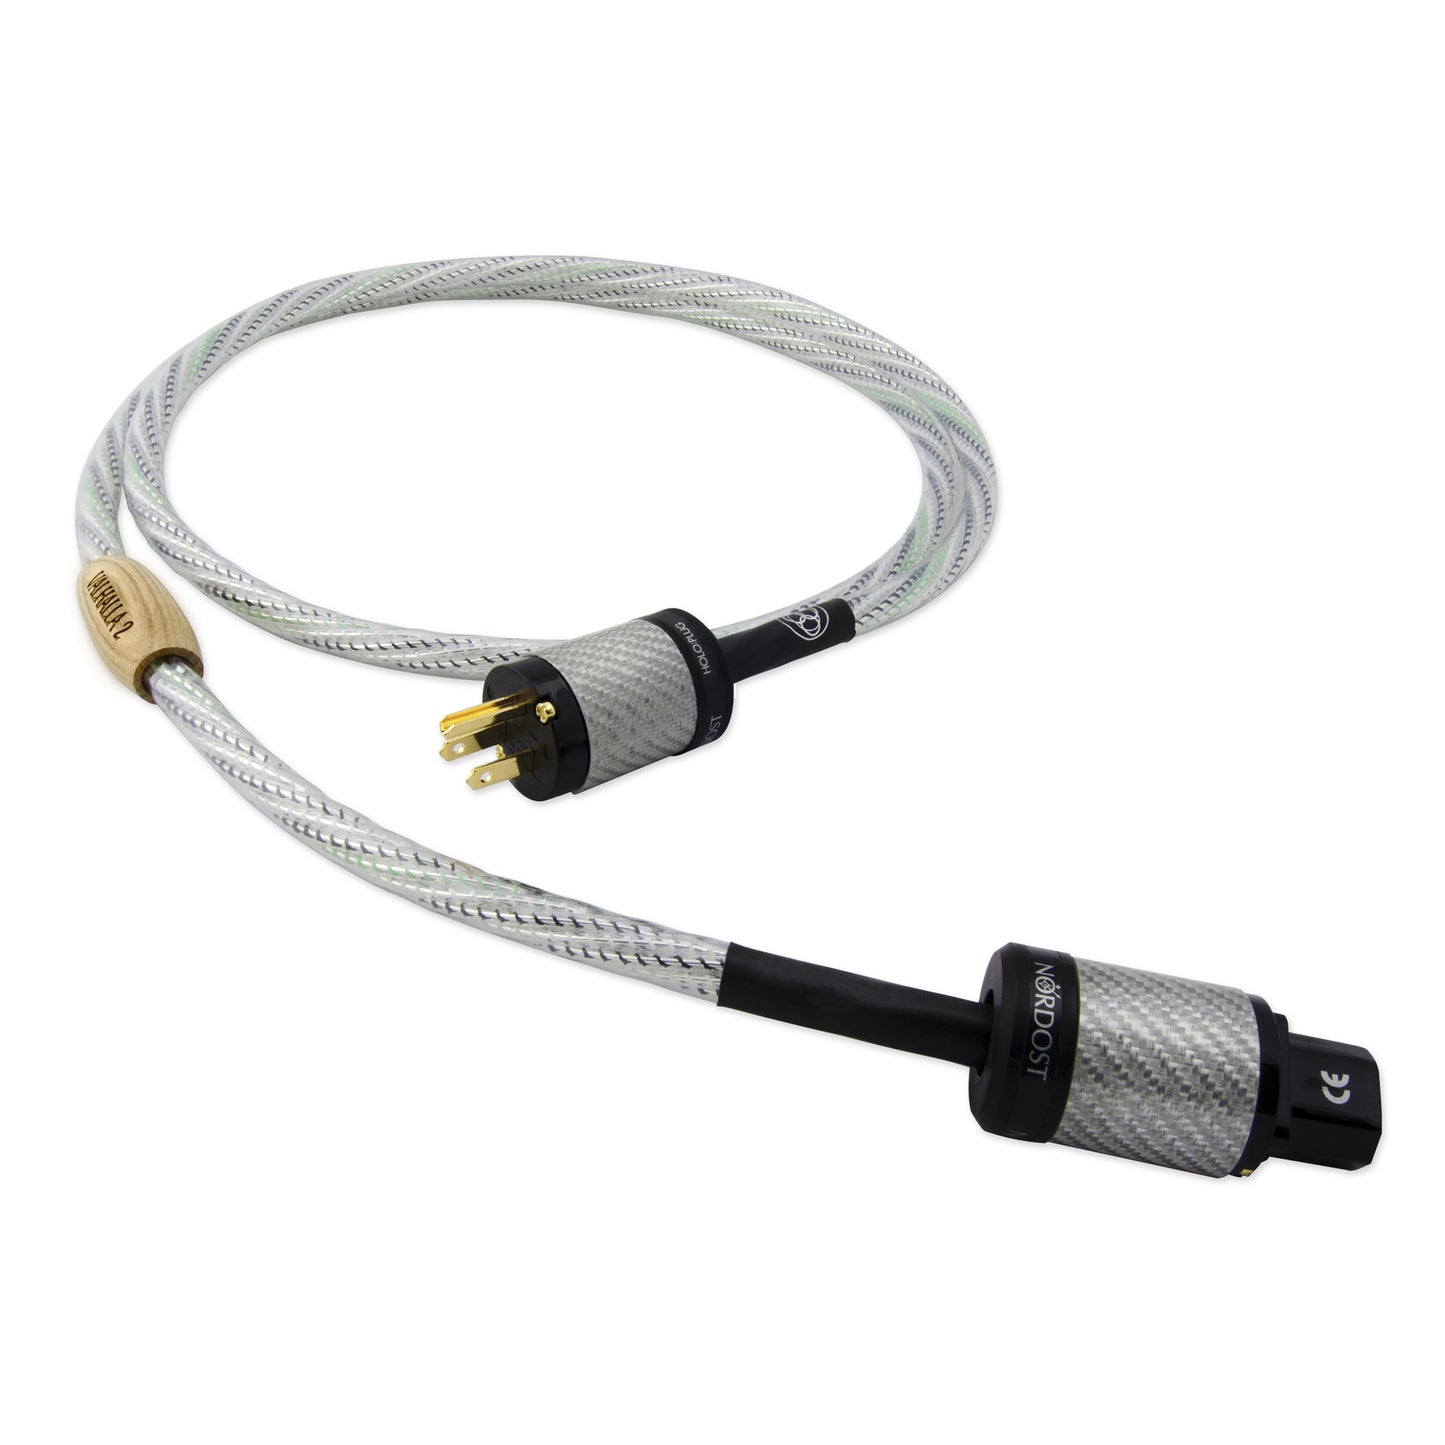 Nordost Valhalla 2 Reference Power Cord